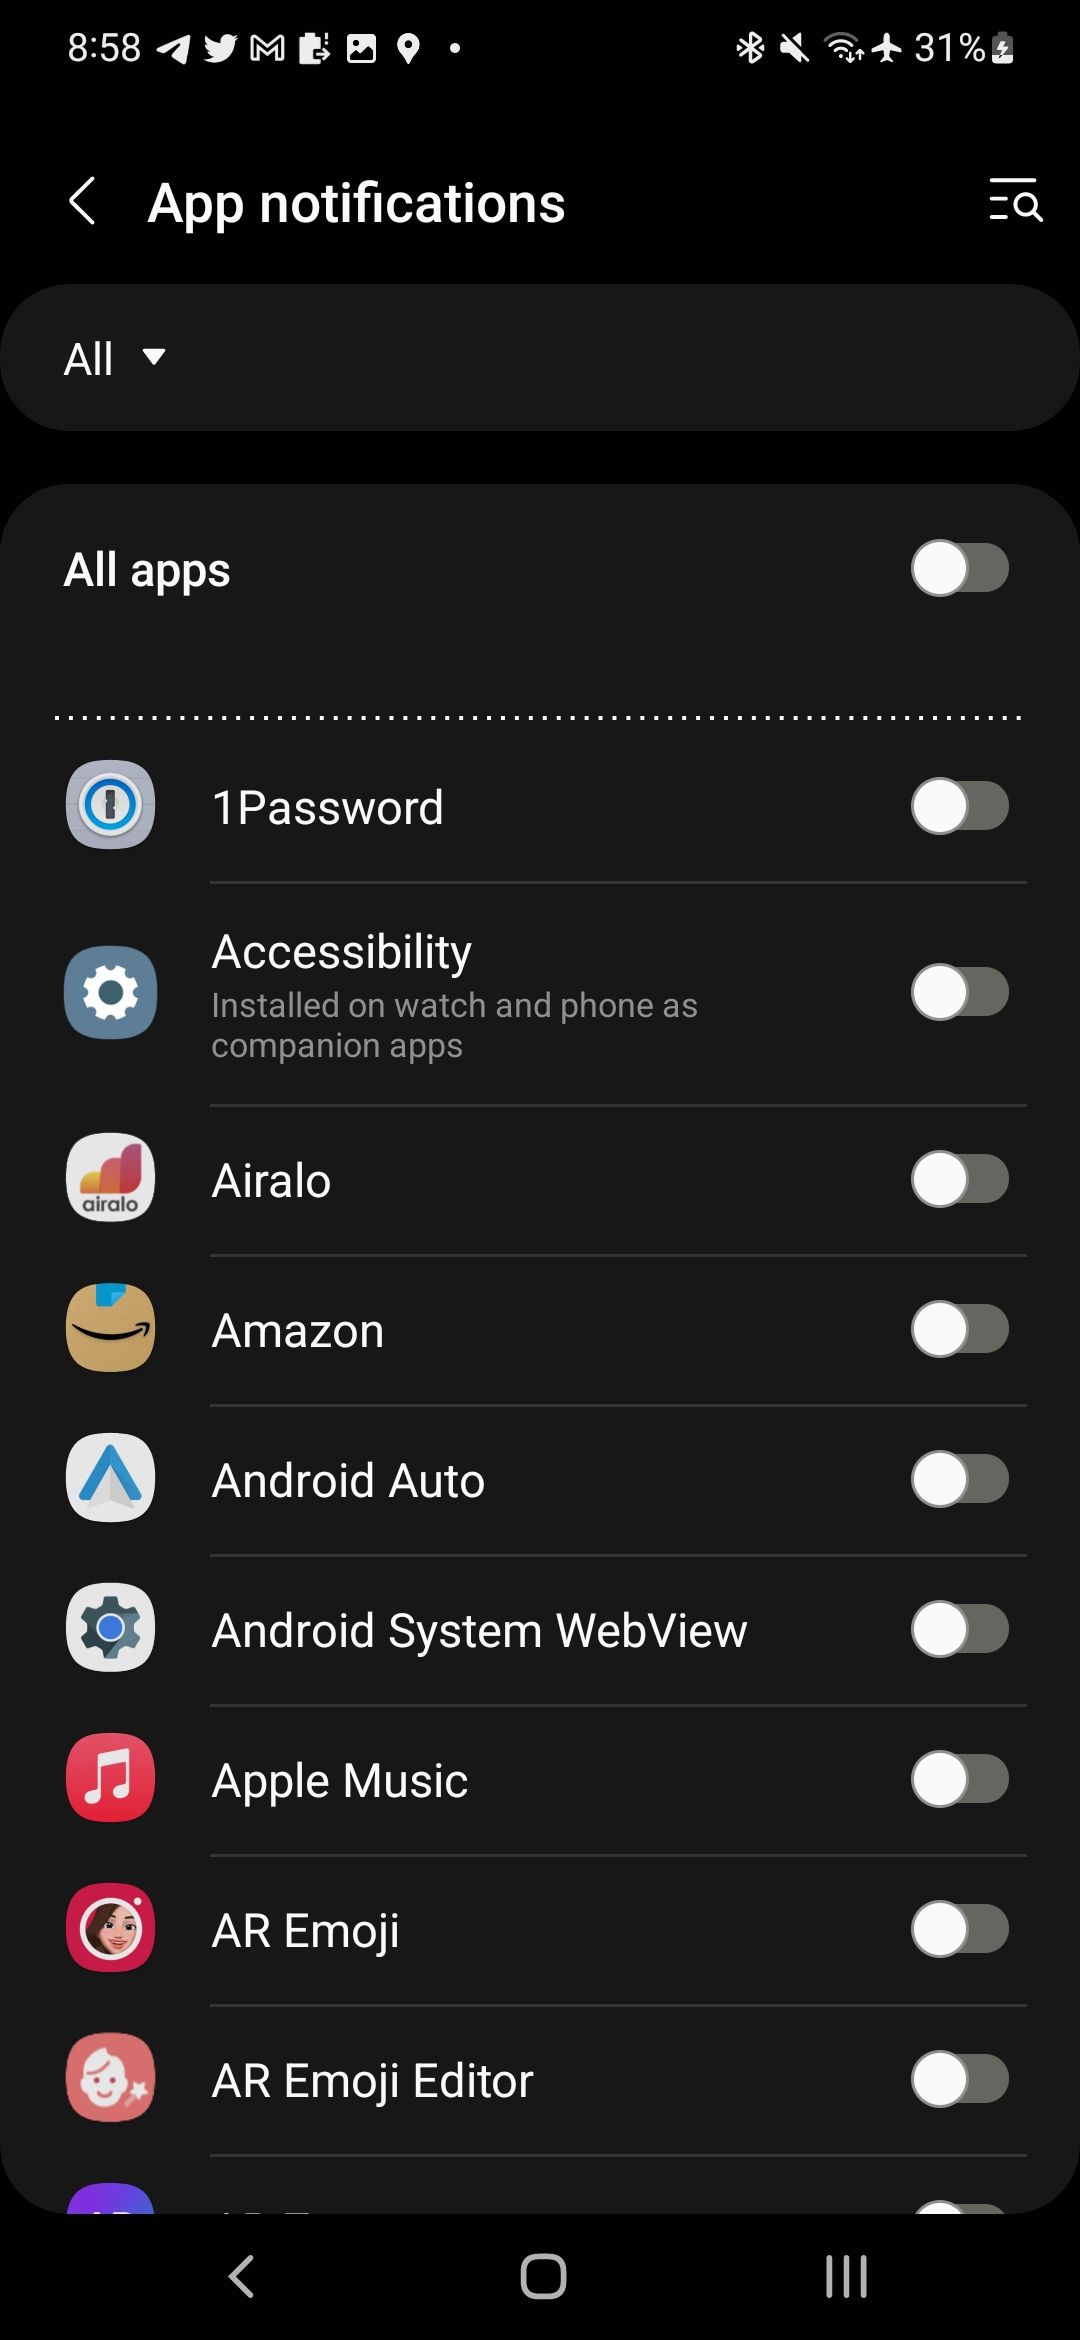 A screenshot of the Galaxy Watch notifications menu showing all the apps with the notifications tab set to "off" on the right side of each app.